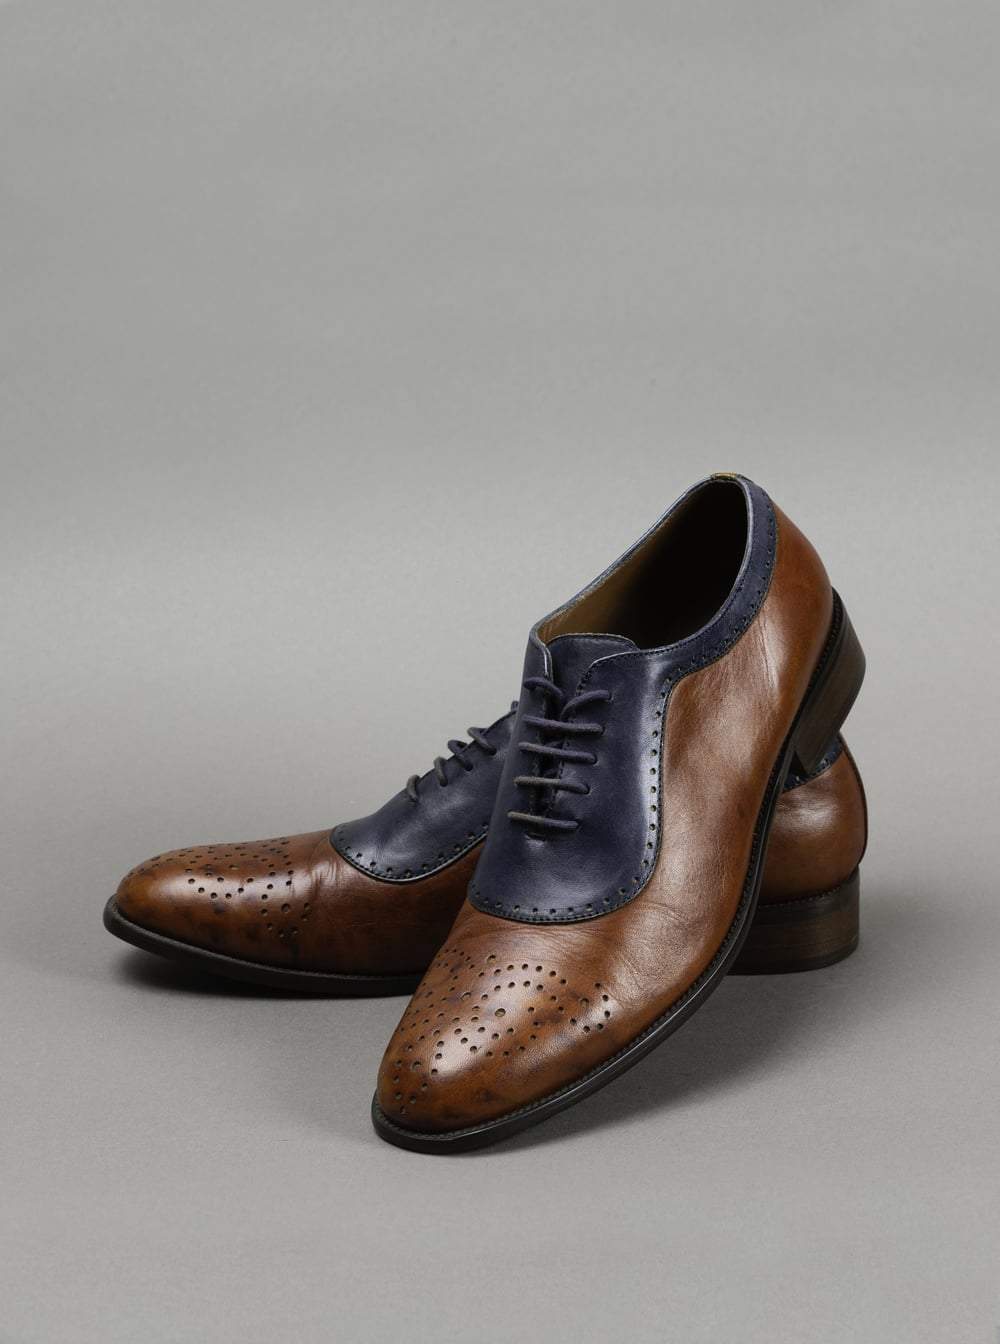 Brown And Blue Bespoke Shoe